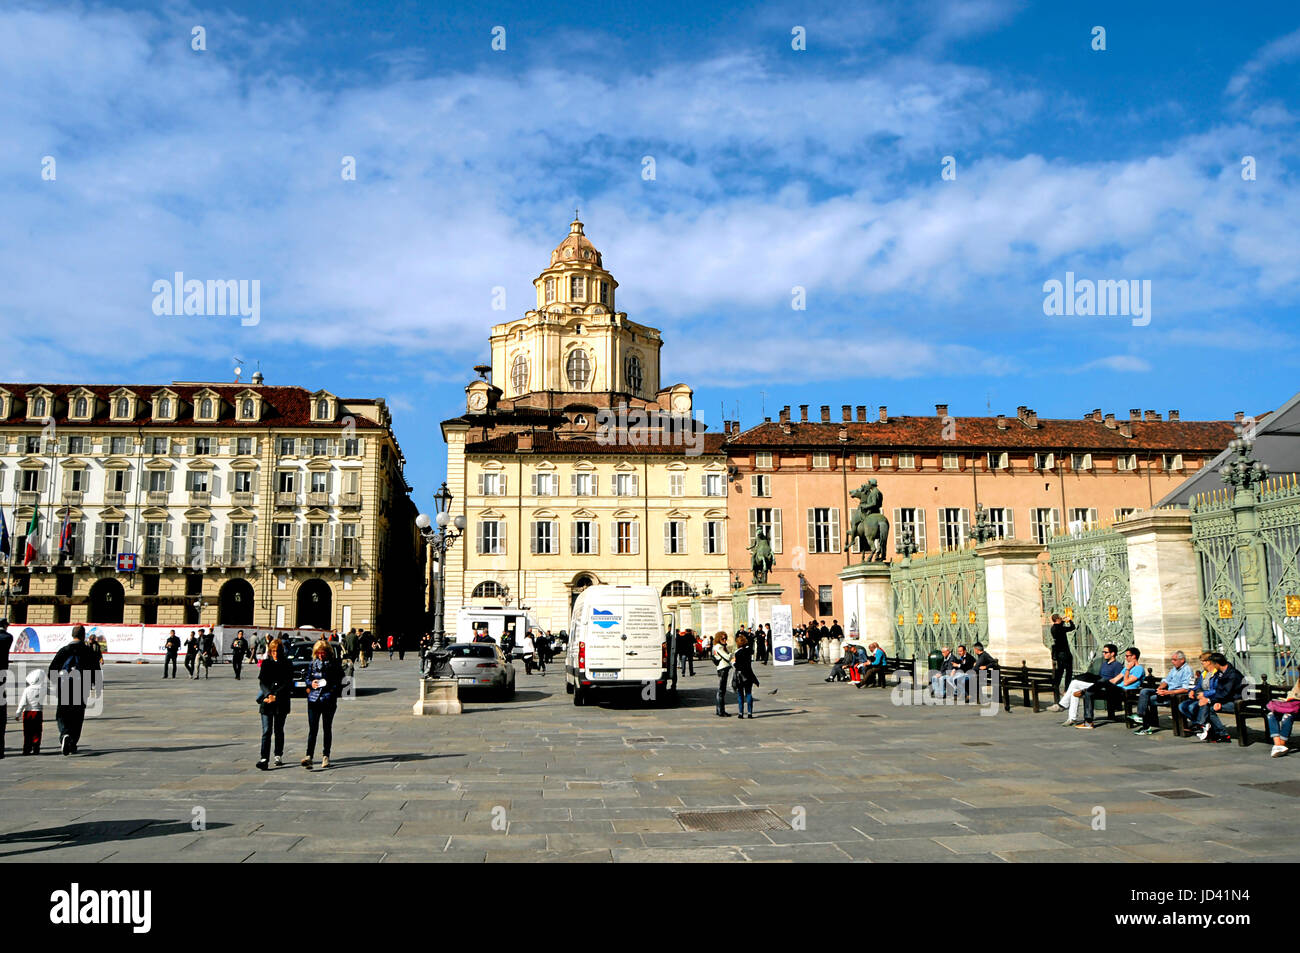 Outside View Of The Palazzo Reale De Torino In Turin Italy On Stock Photo Alamy